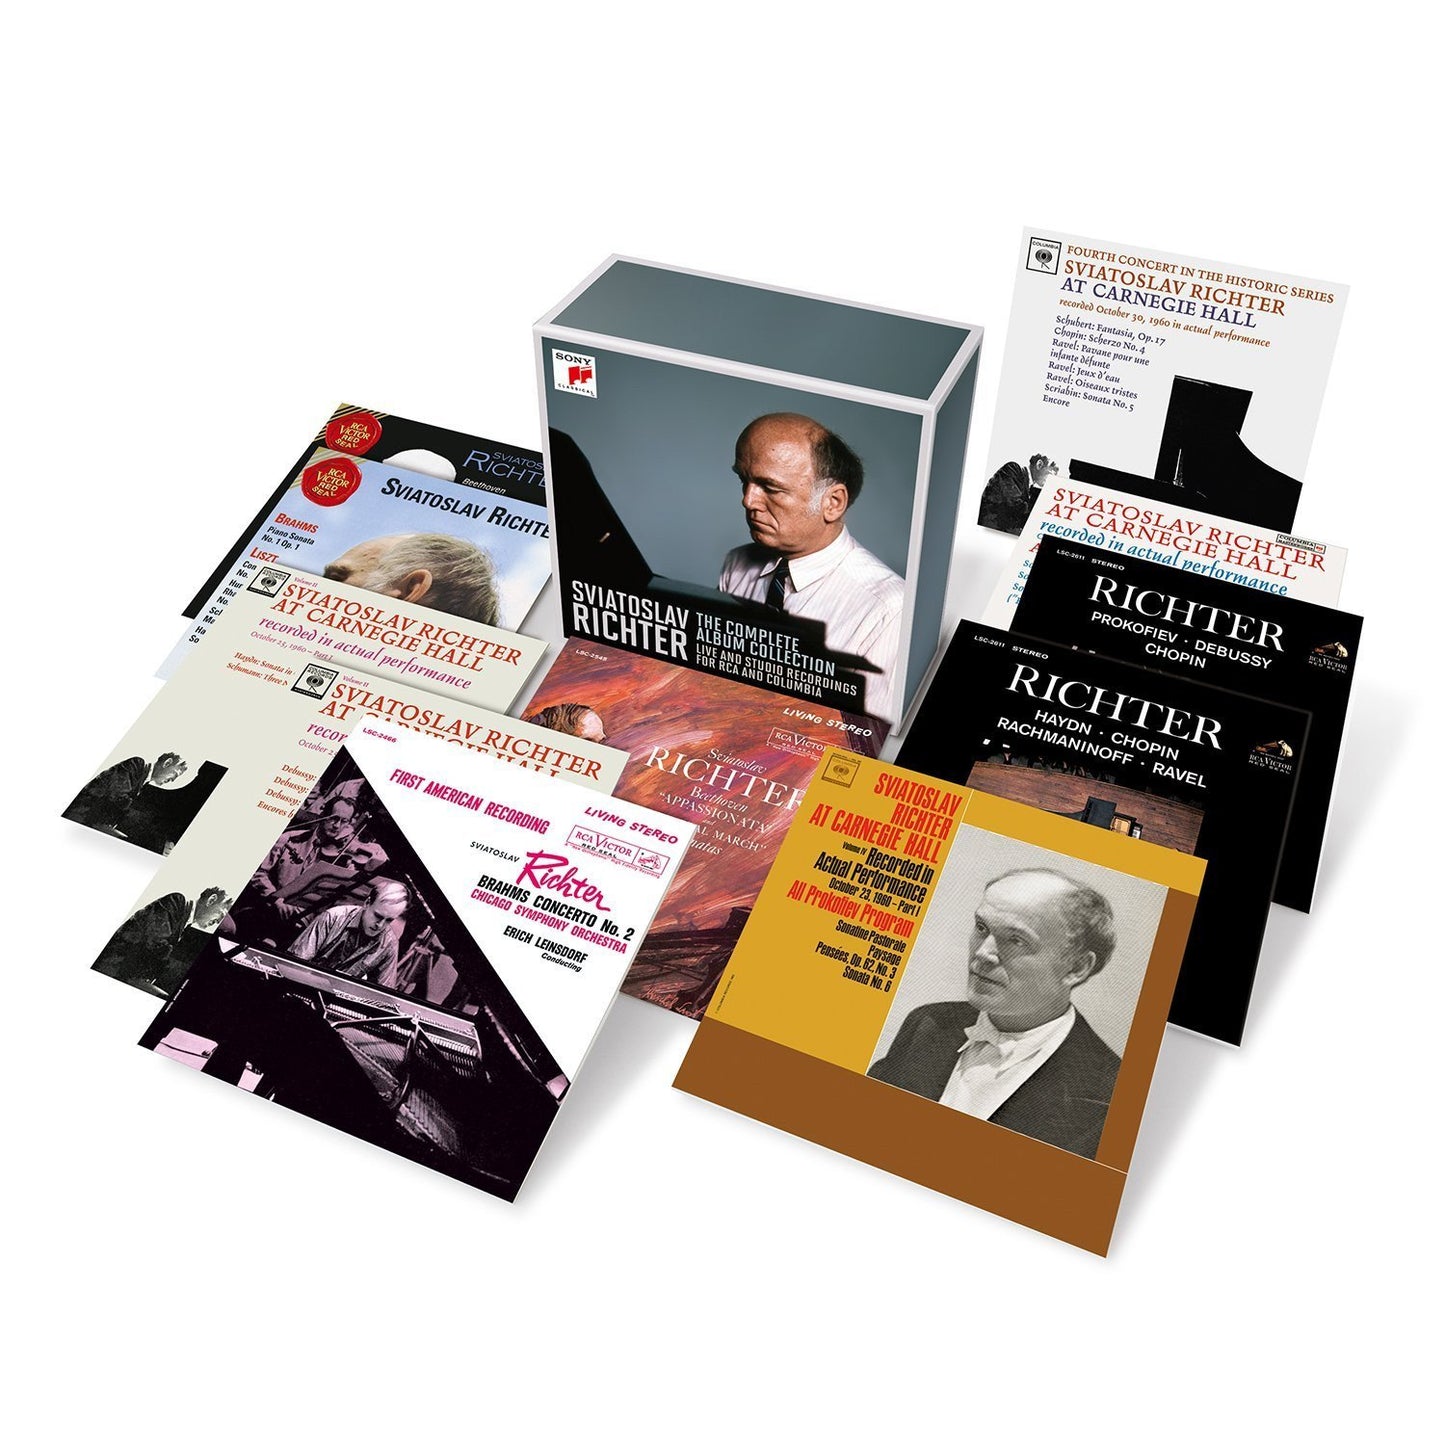 SVIATOSLAV RICHTER - THE COMPLETE COLUMBIA AND RCA ALBUM COLLECTION (18 CDS)